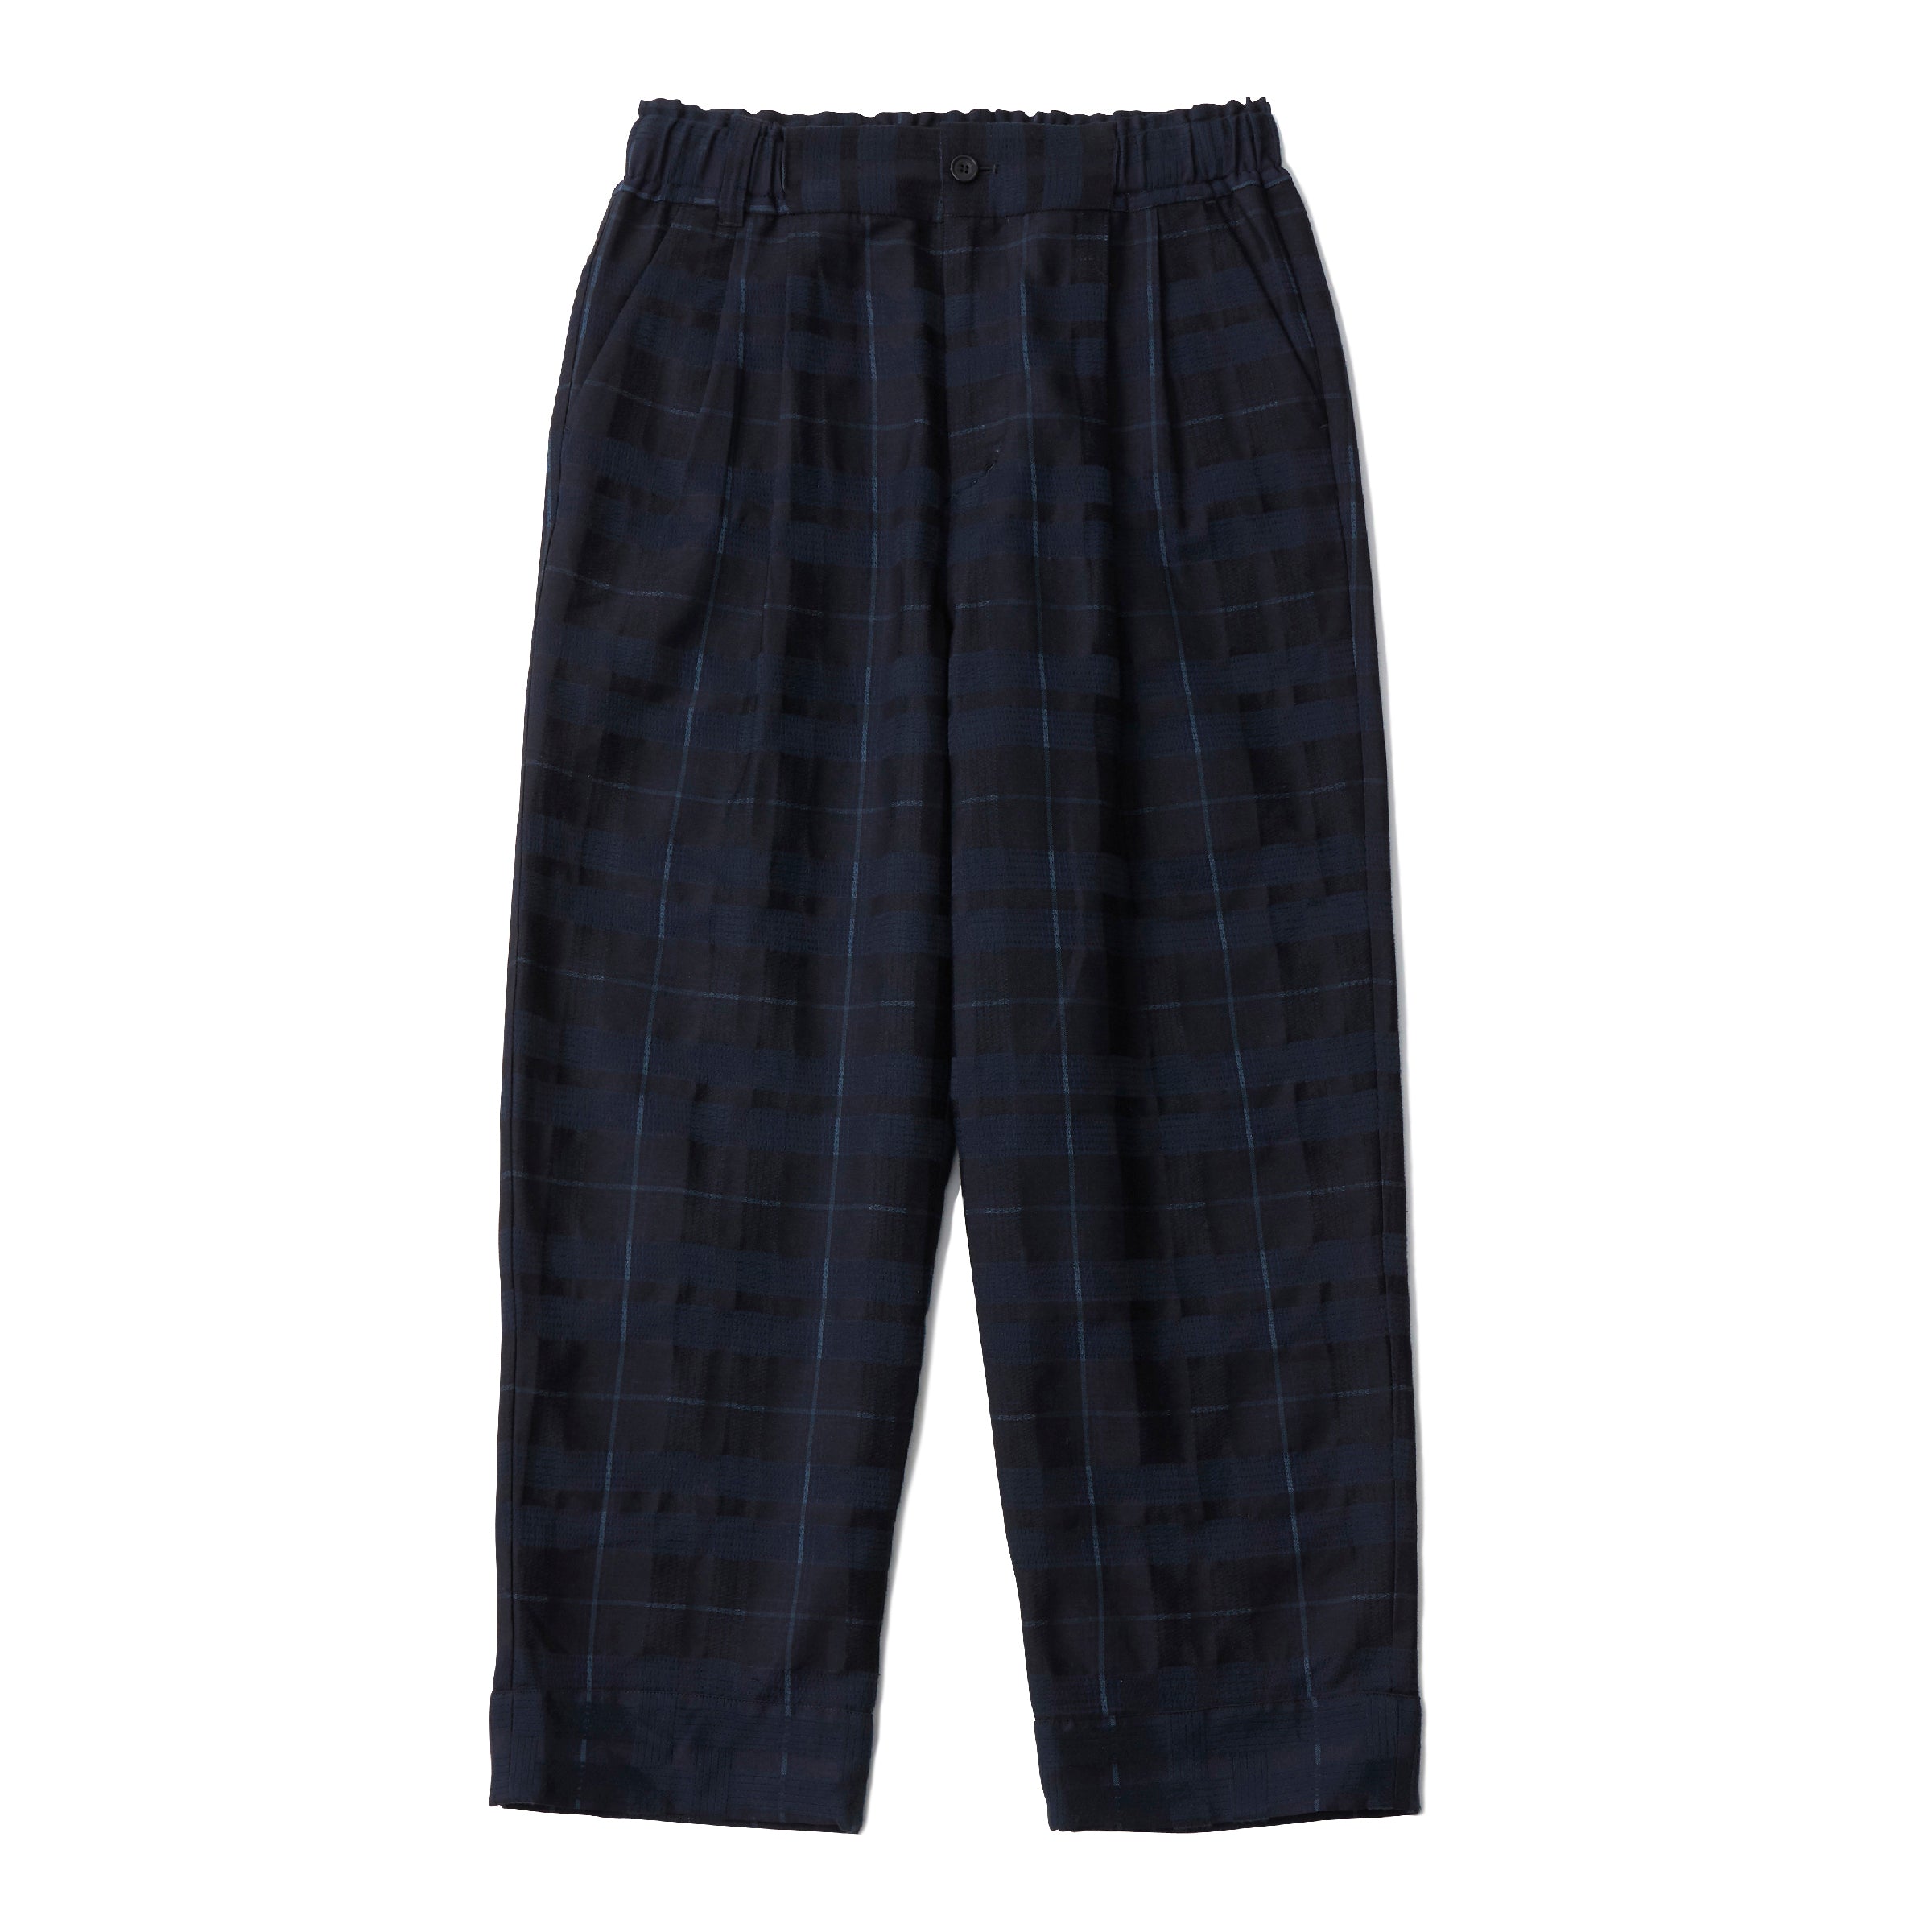 BIG CHECK 2TUCK PANTS – White Mountaineering OFFICIAL WEB SITE.